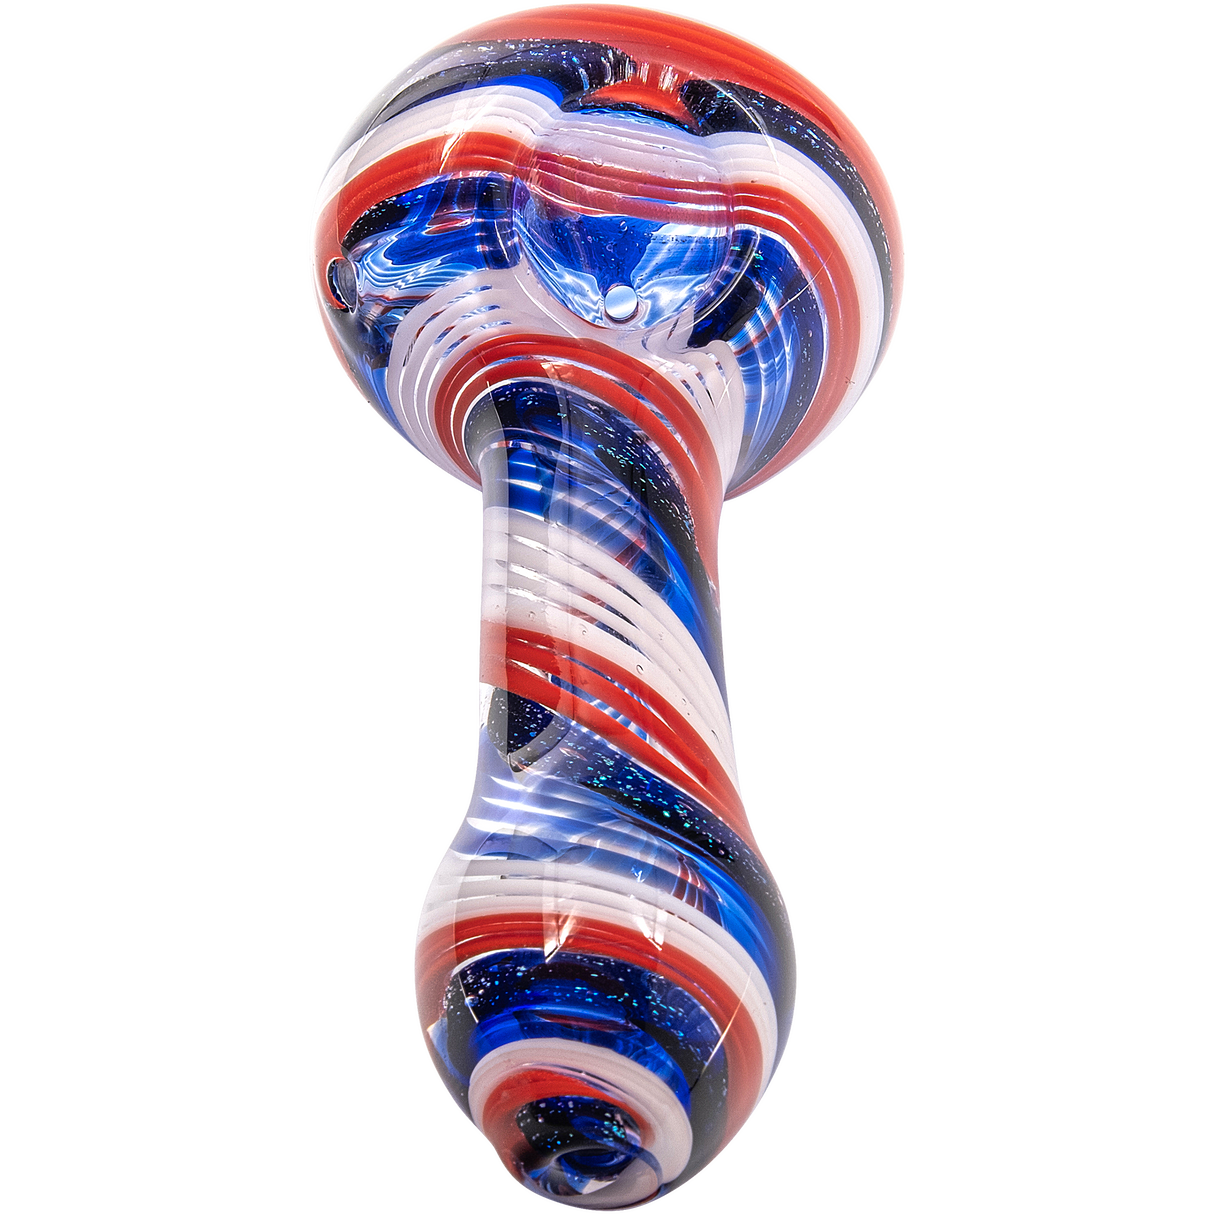 LA Pipes Stars and Stripes Independence Glass Spoon Pipe, compact design, front view